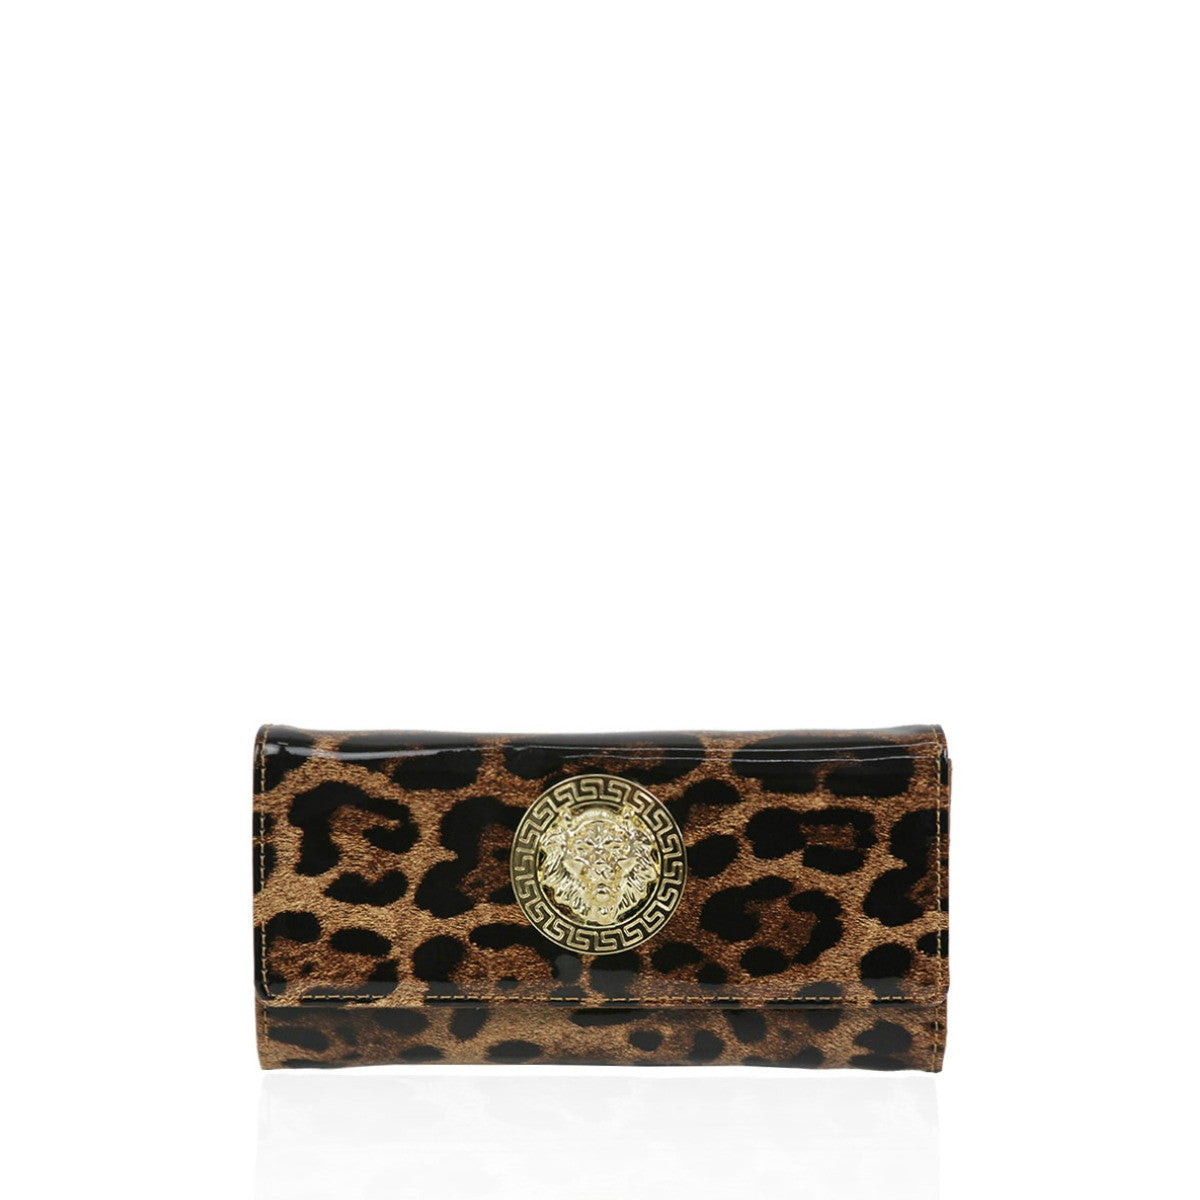 JUICY COUTURE SHINY Leopard Print Handbag With Gold Accents And Pockets  £11.92 - PicClick UK